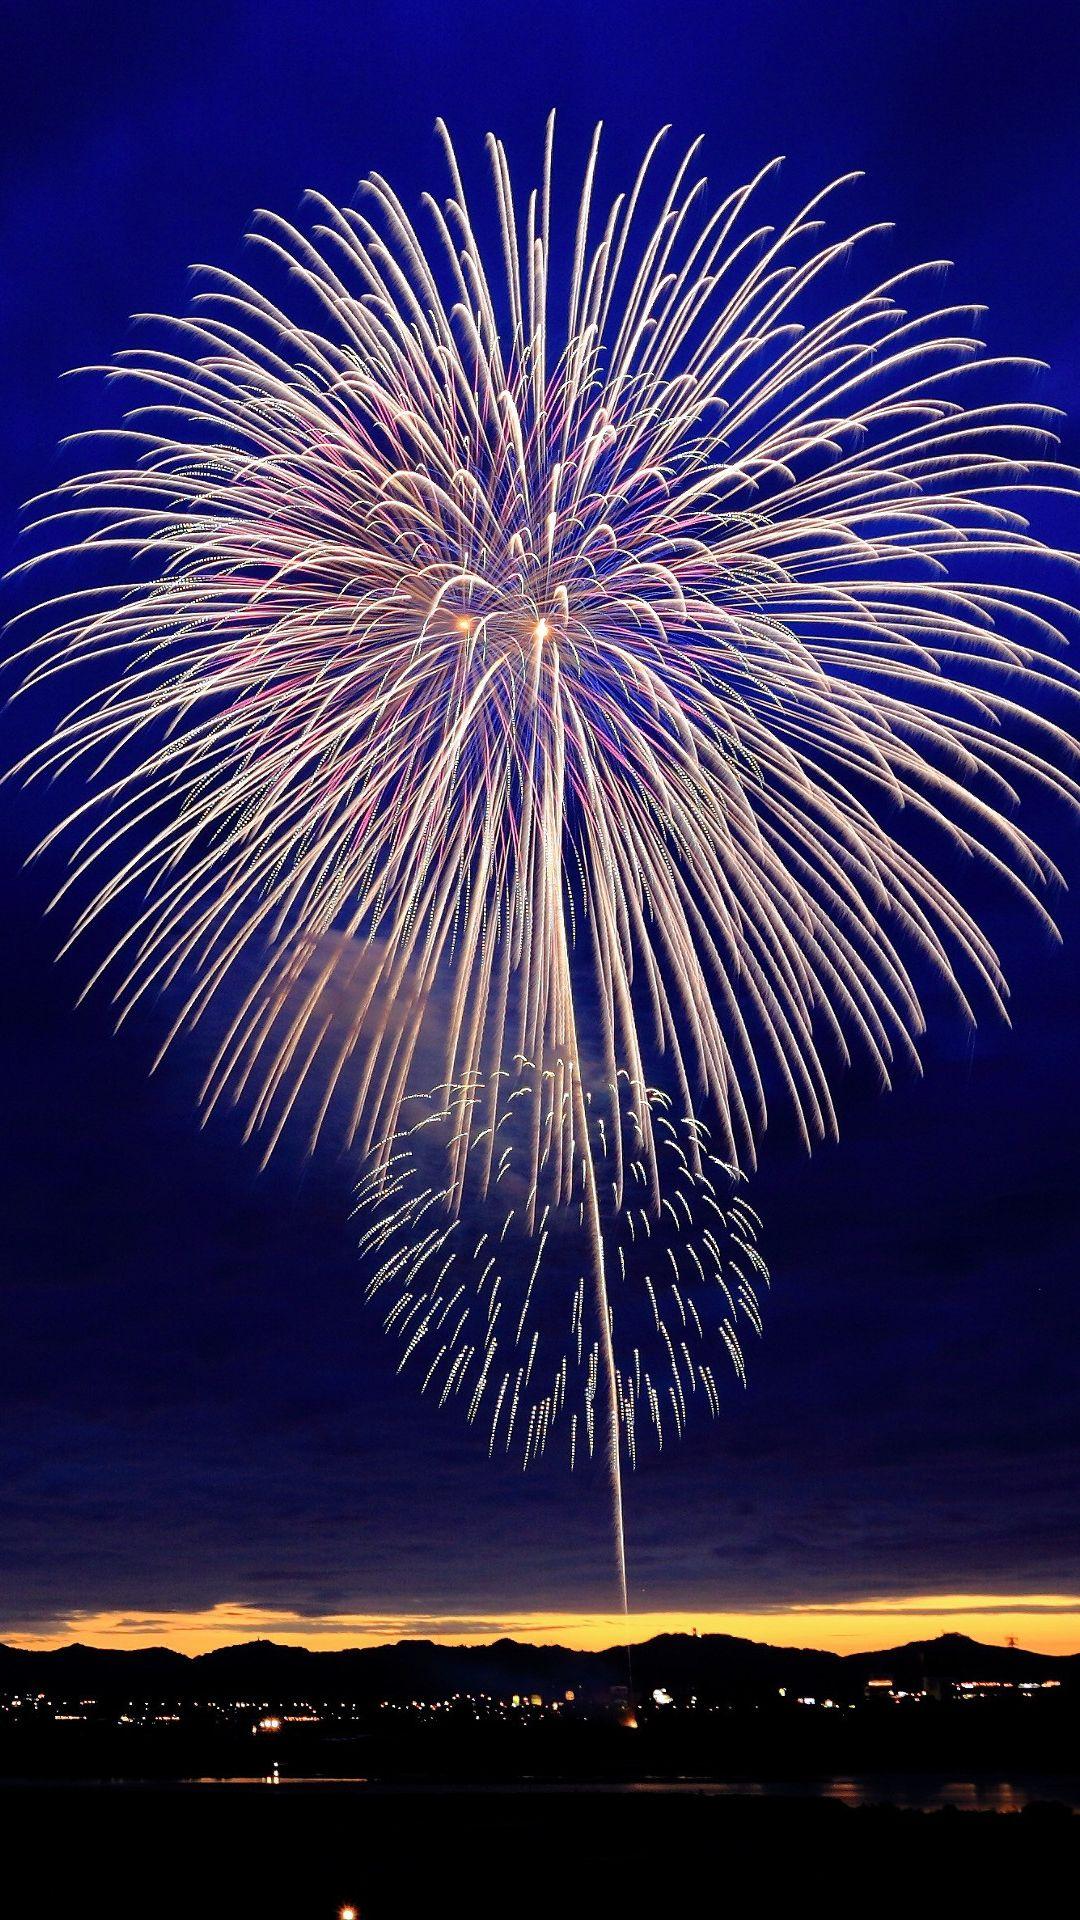 D Fireworks Live Wallpaper Android Apps on Google Play. HD